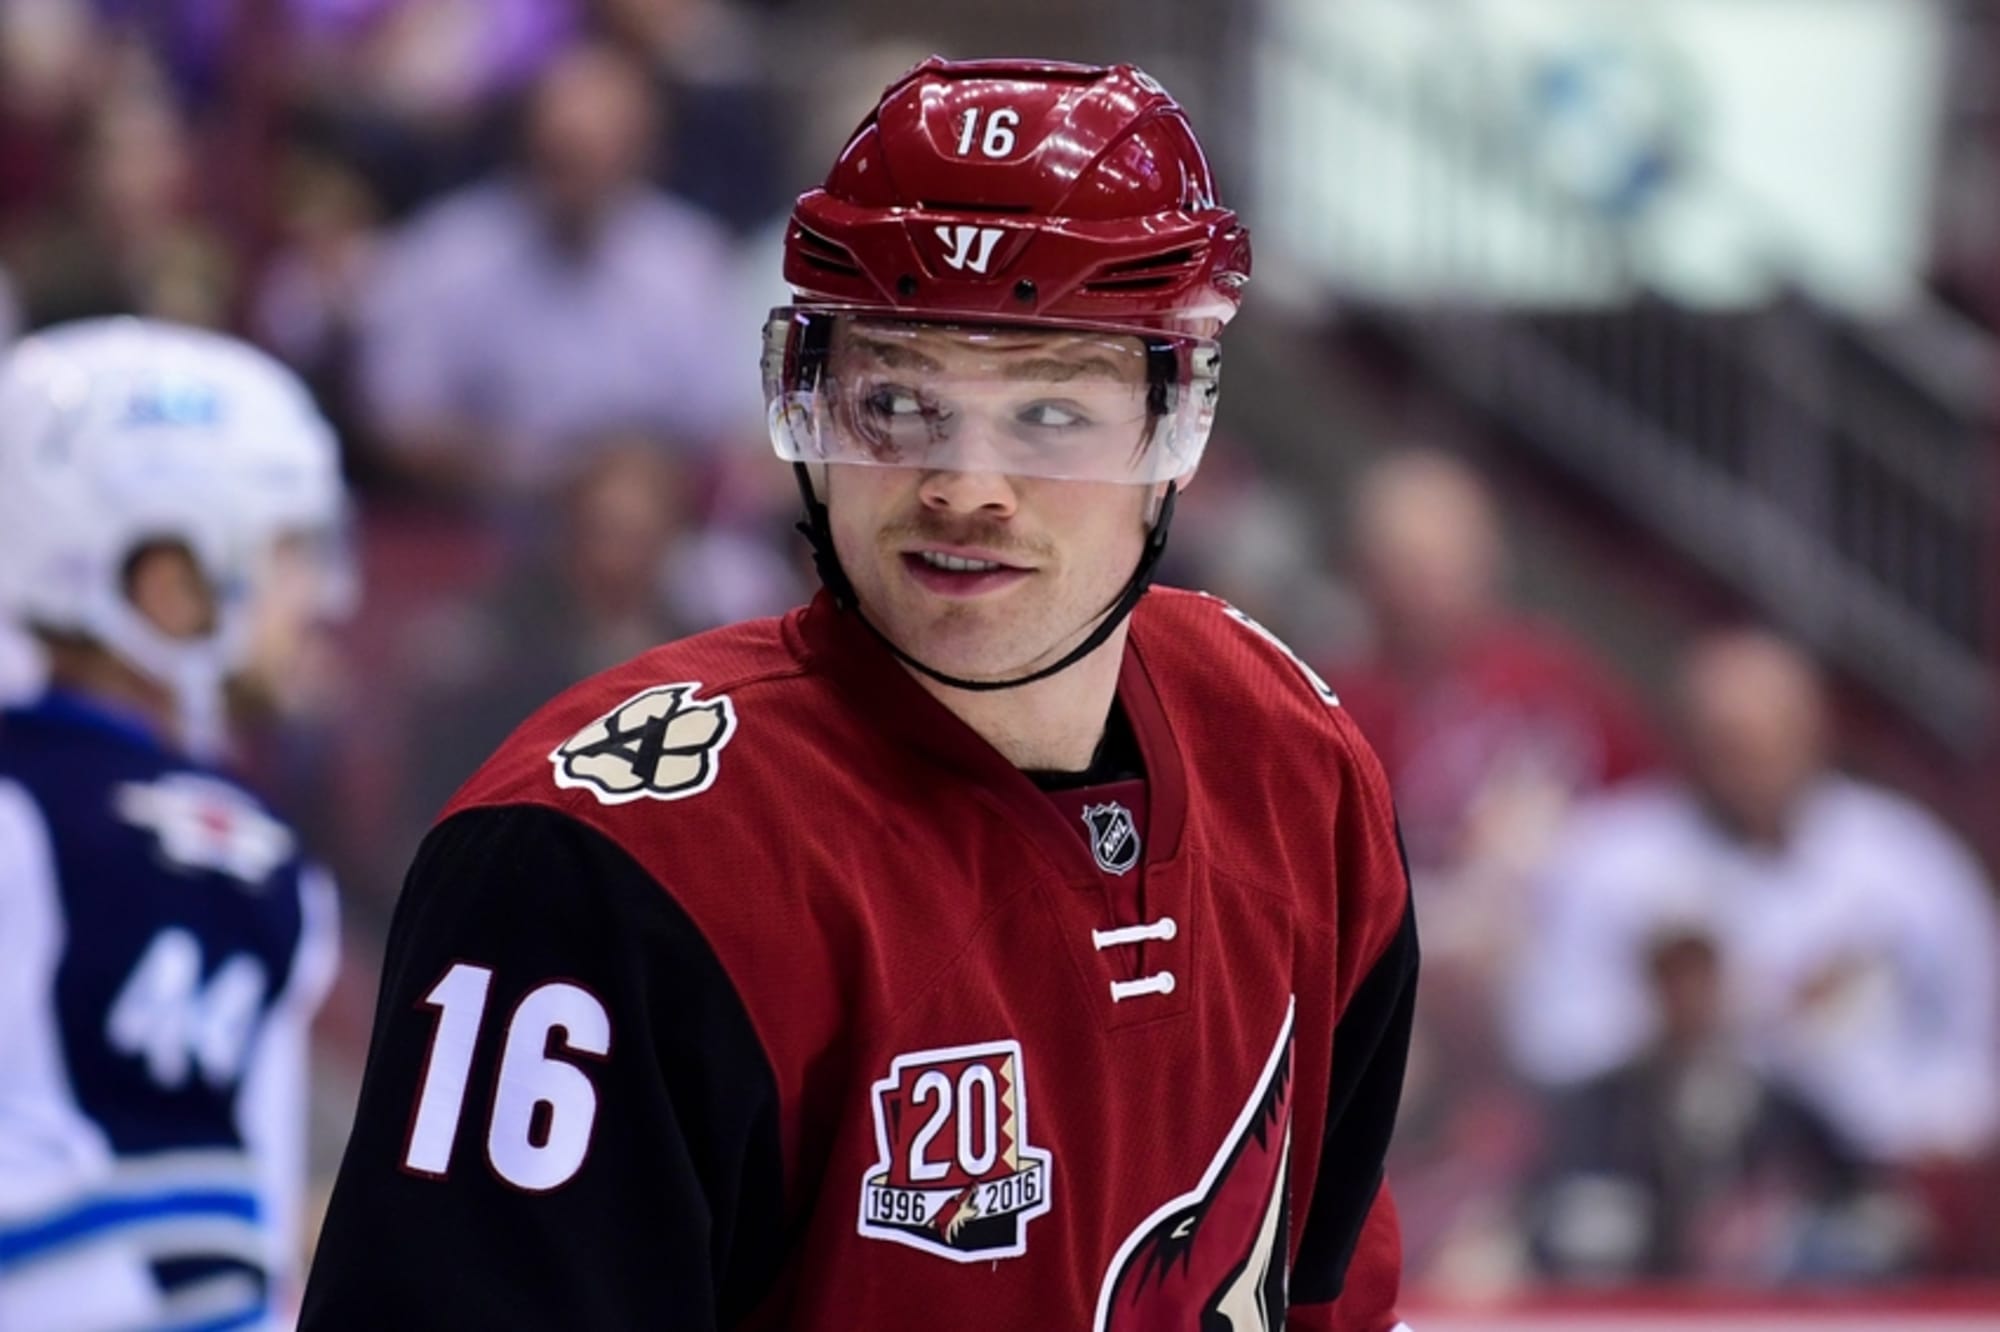 Max Domi sets up Coyotes goal with beautiful cross-ice saucer pass